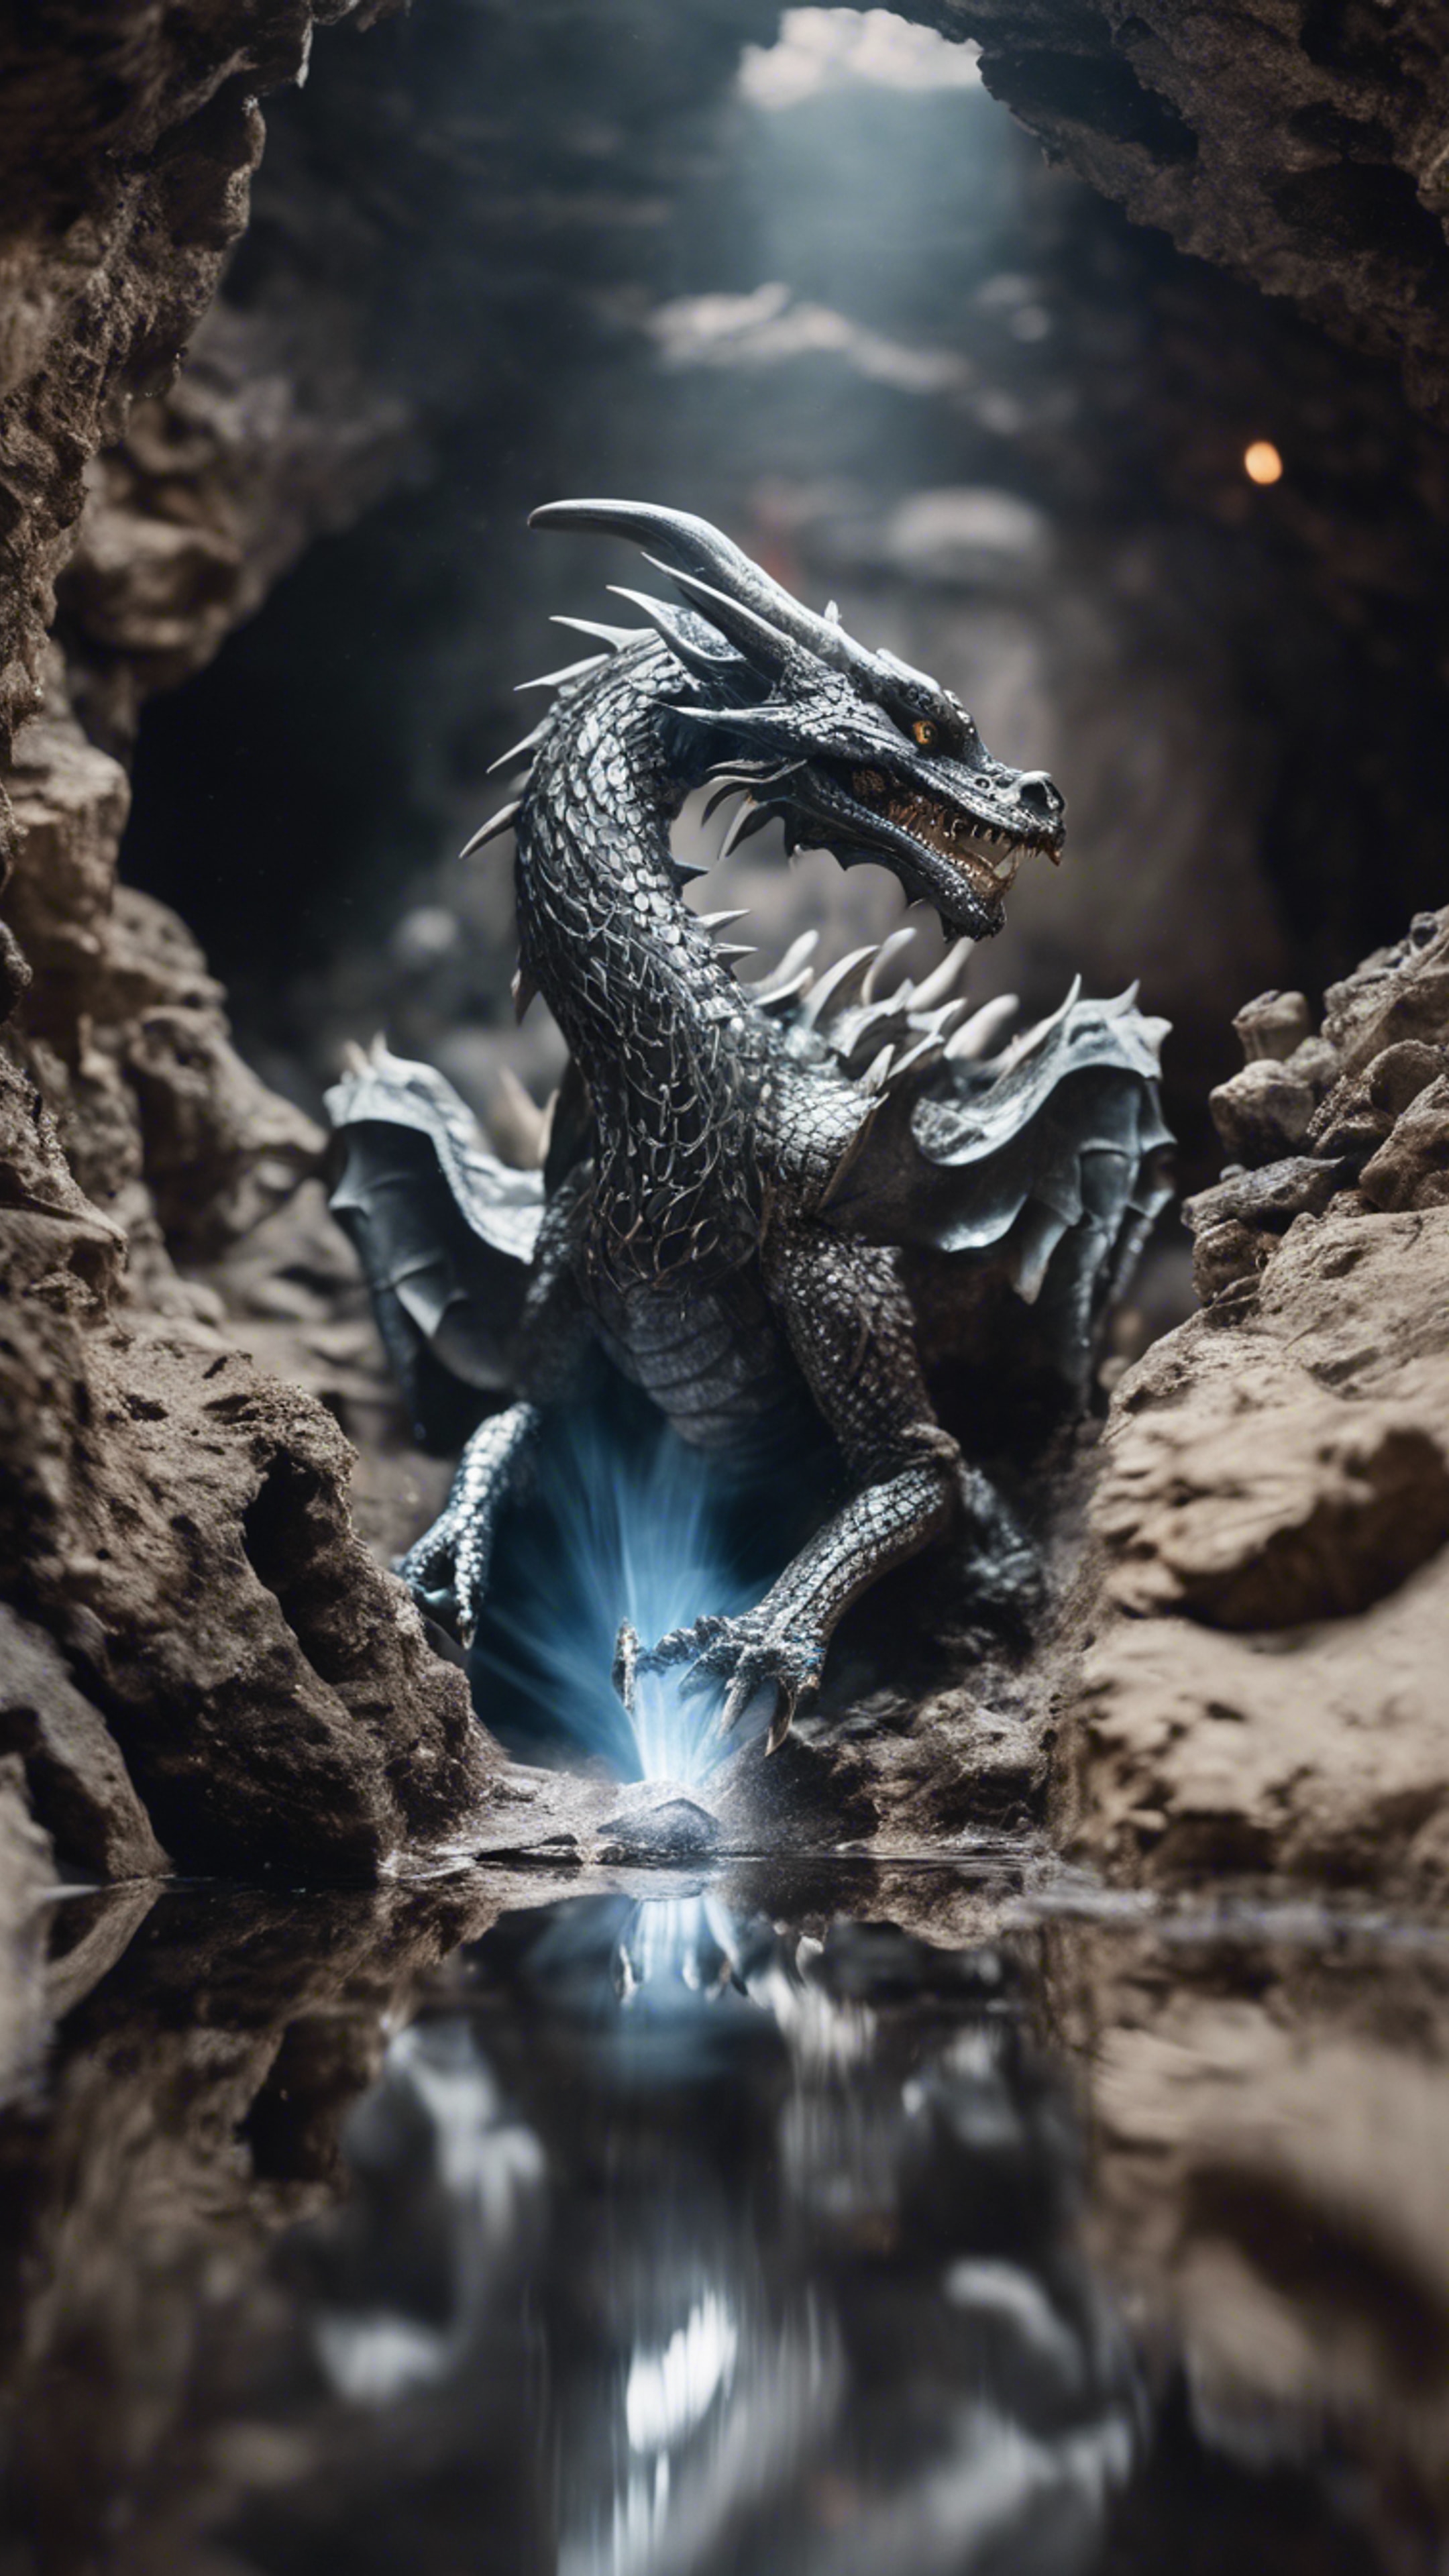 A cool dragon of pure quicksilver, fluid and reflective, darting through a forgotten mine shaft.壁紙[4f182db5f22341209a39]